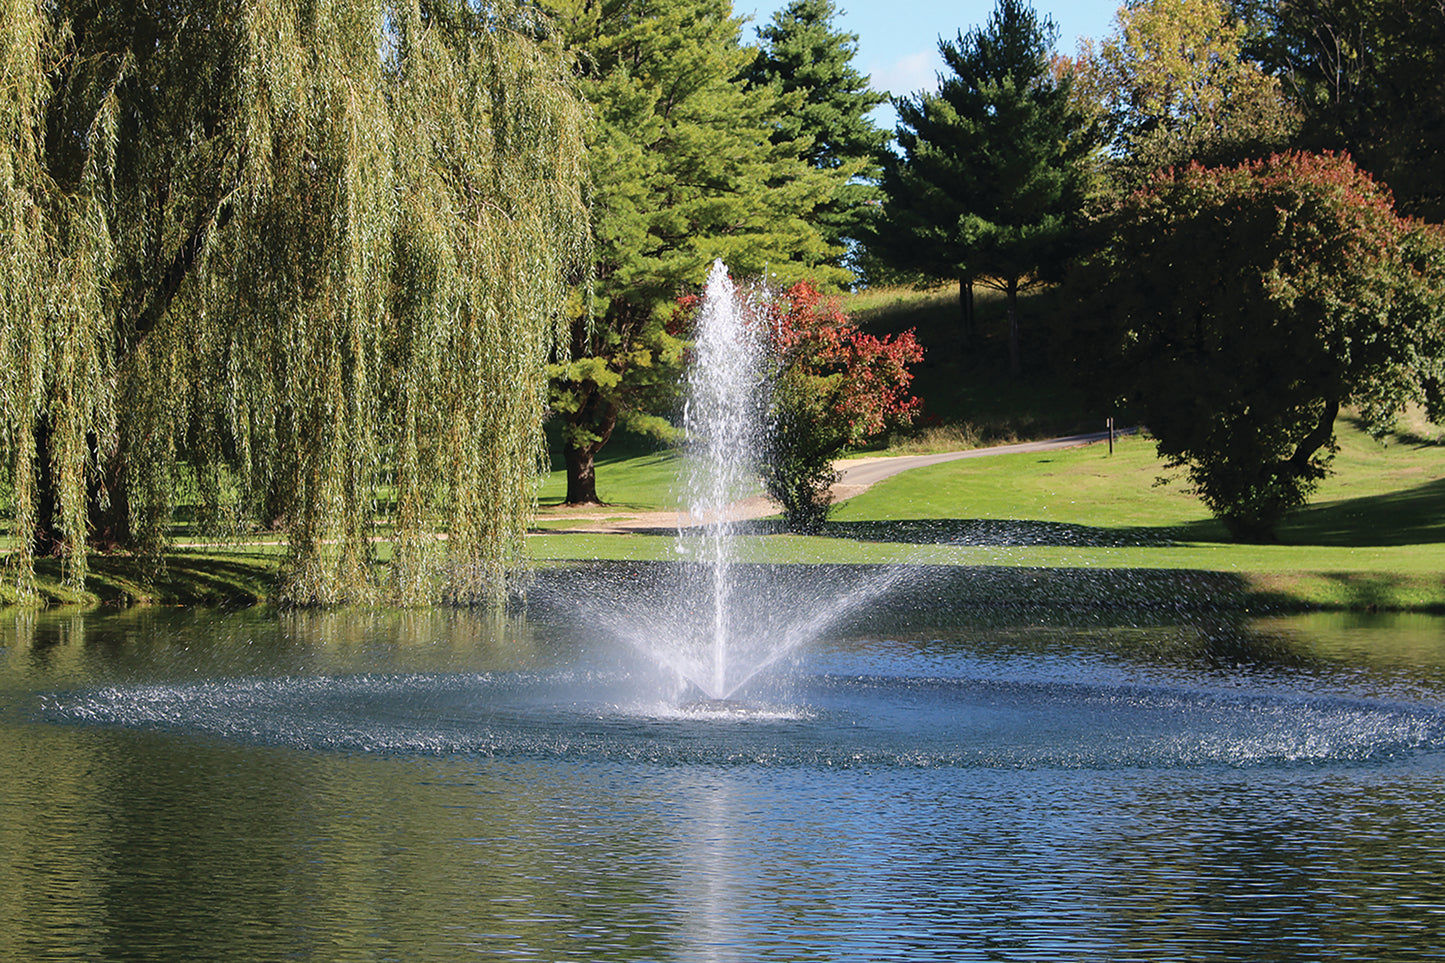 Kasco 3400JF 3/4 HP J Series Decorative Pond Fountain - Living Water Aeration